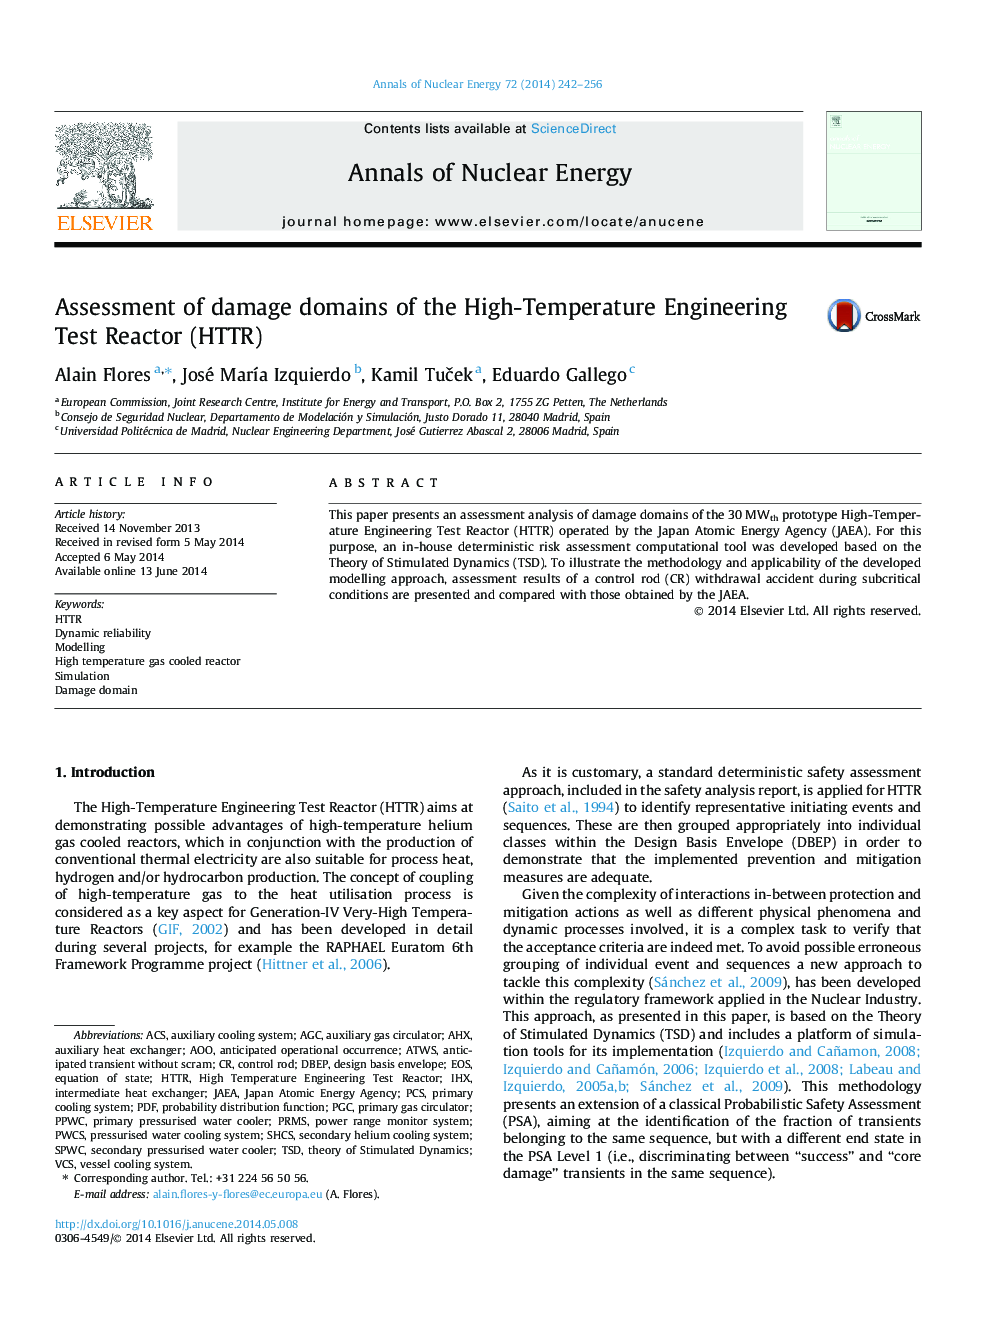 Assessment of damage domains of the High-Temperature Engineering Test Reactor (HTTR)